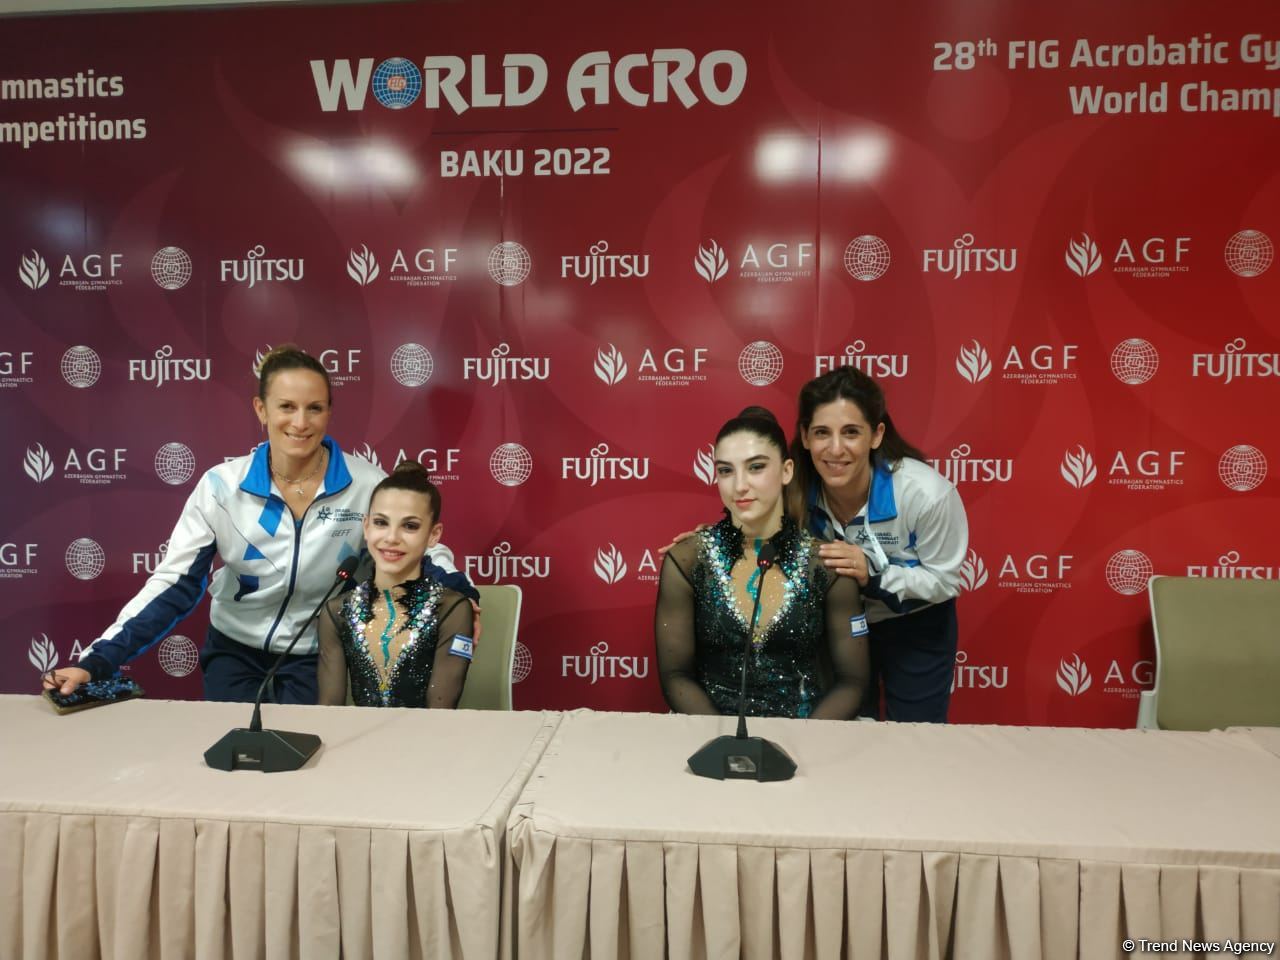 Gold grabbed at 12th FIG Acrobatic Gymnastics World Age Group Competitions in Baku - great success and achievement – Israeli athletes